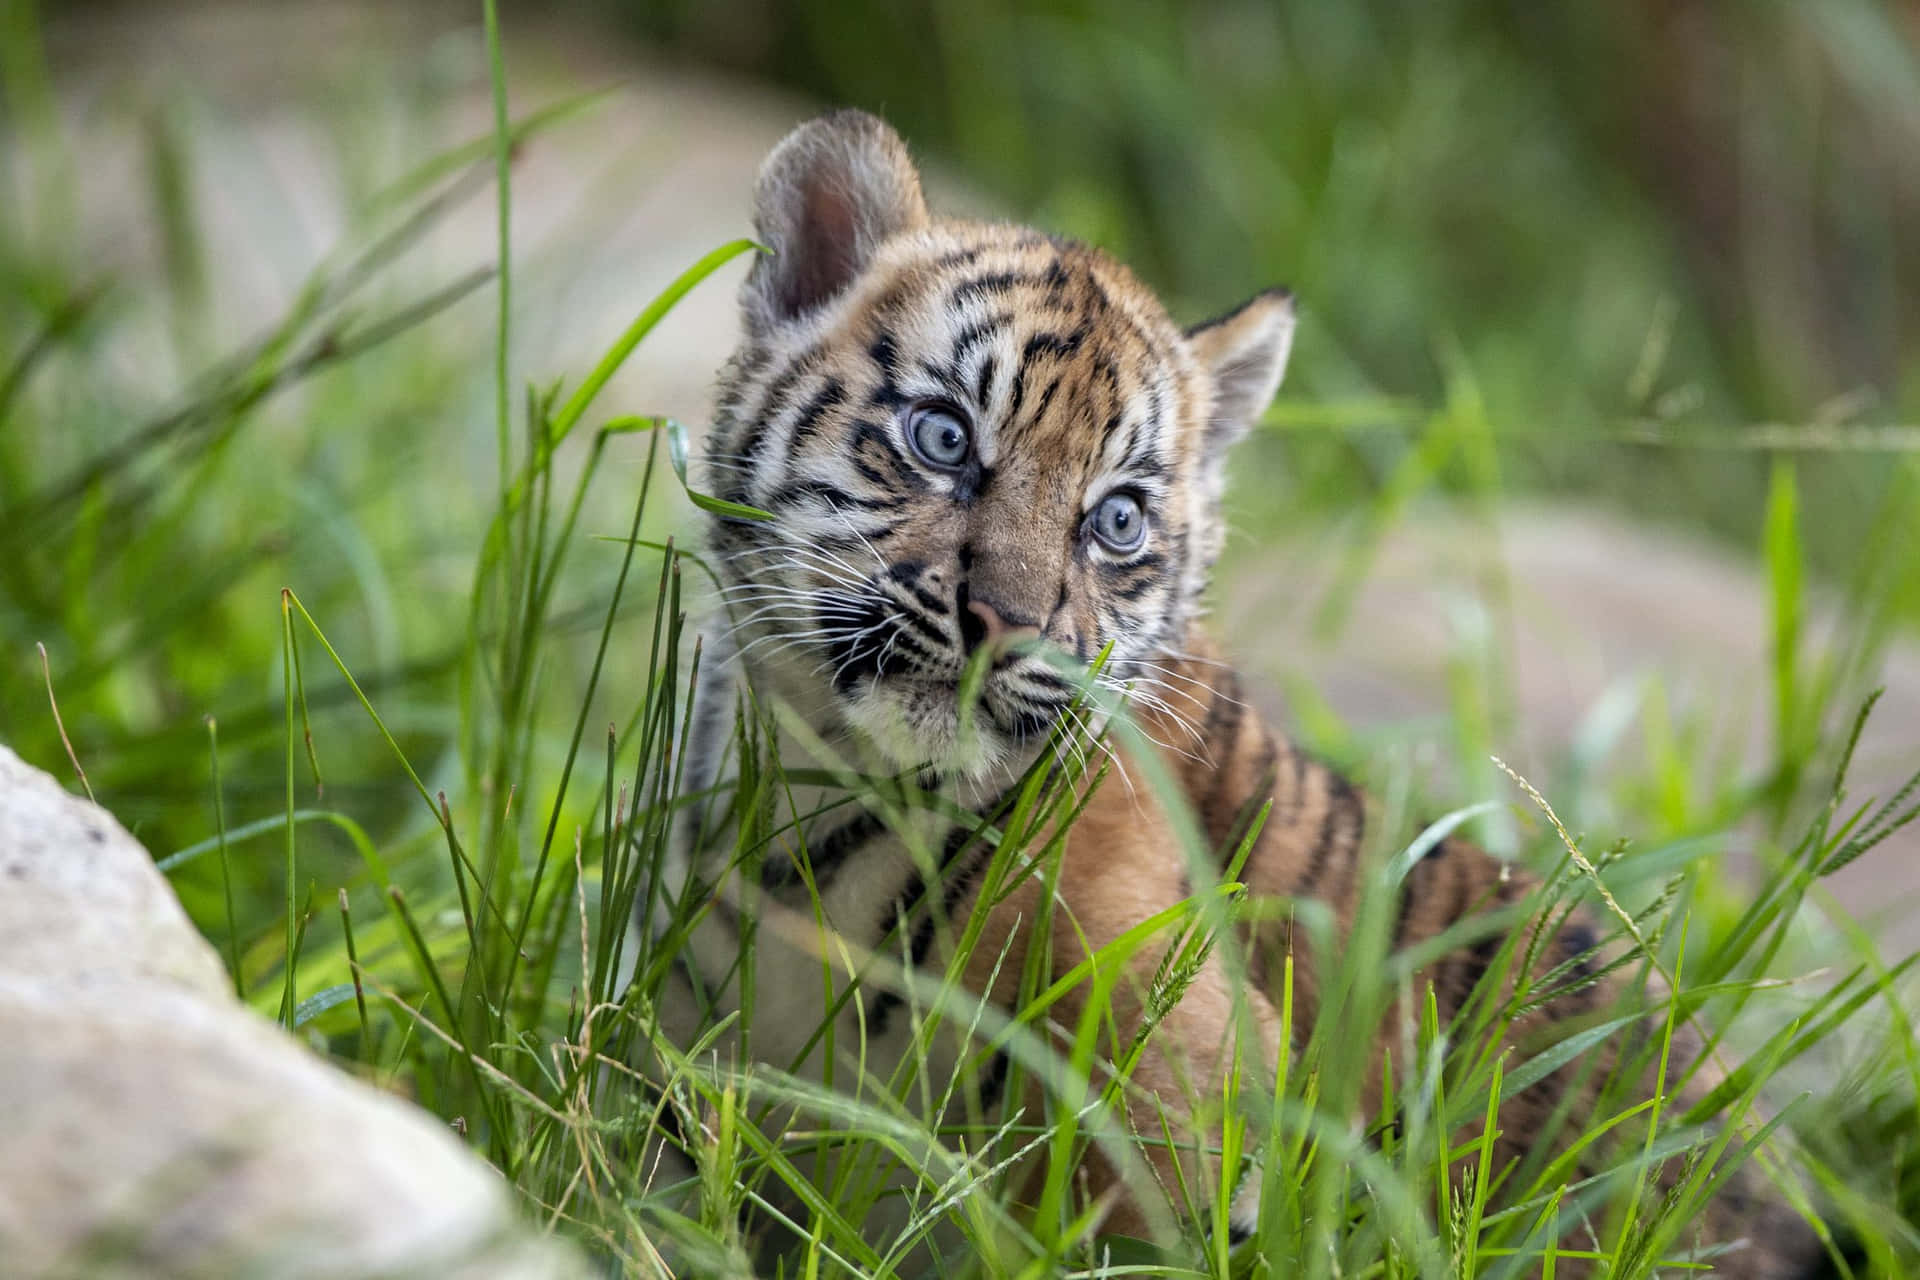 A baby tiger peers out from the grass